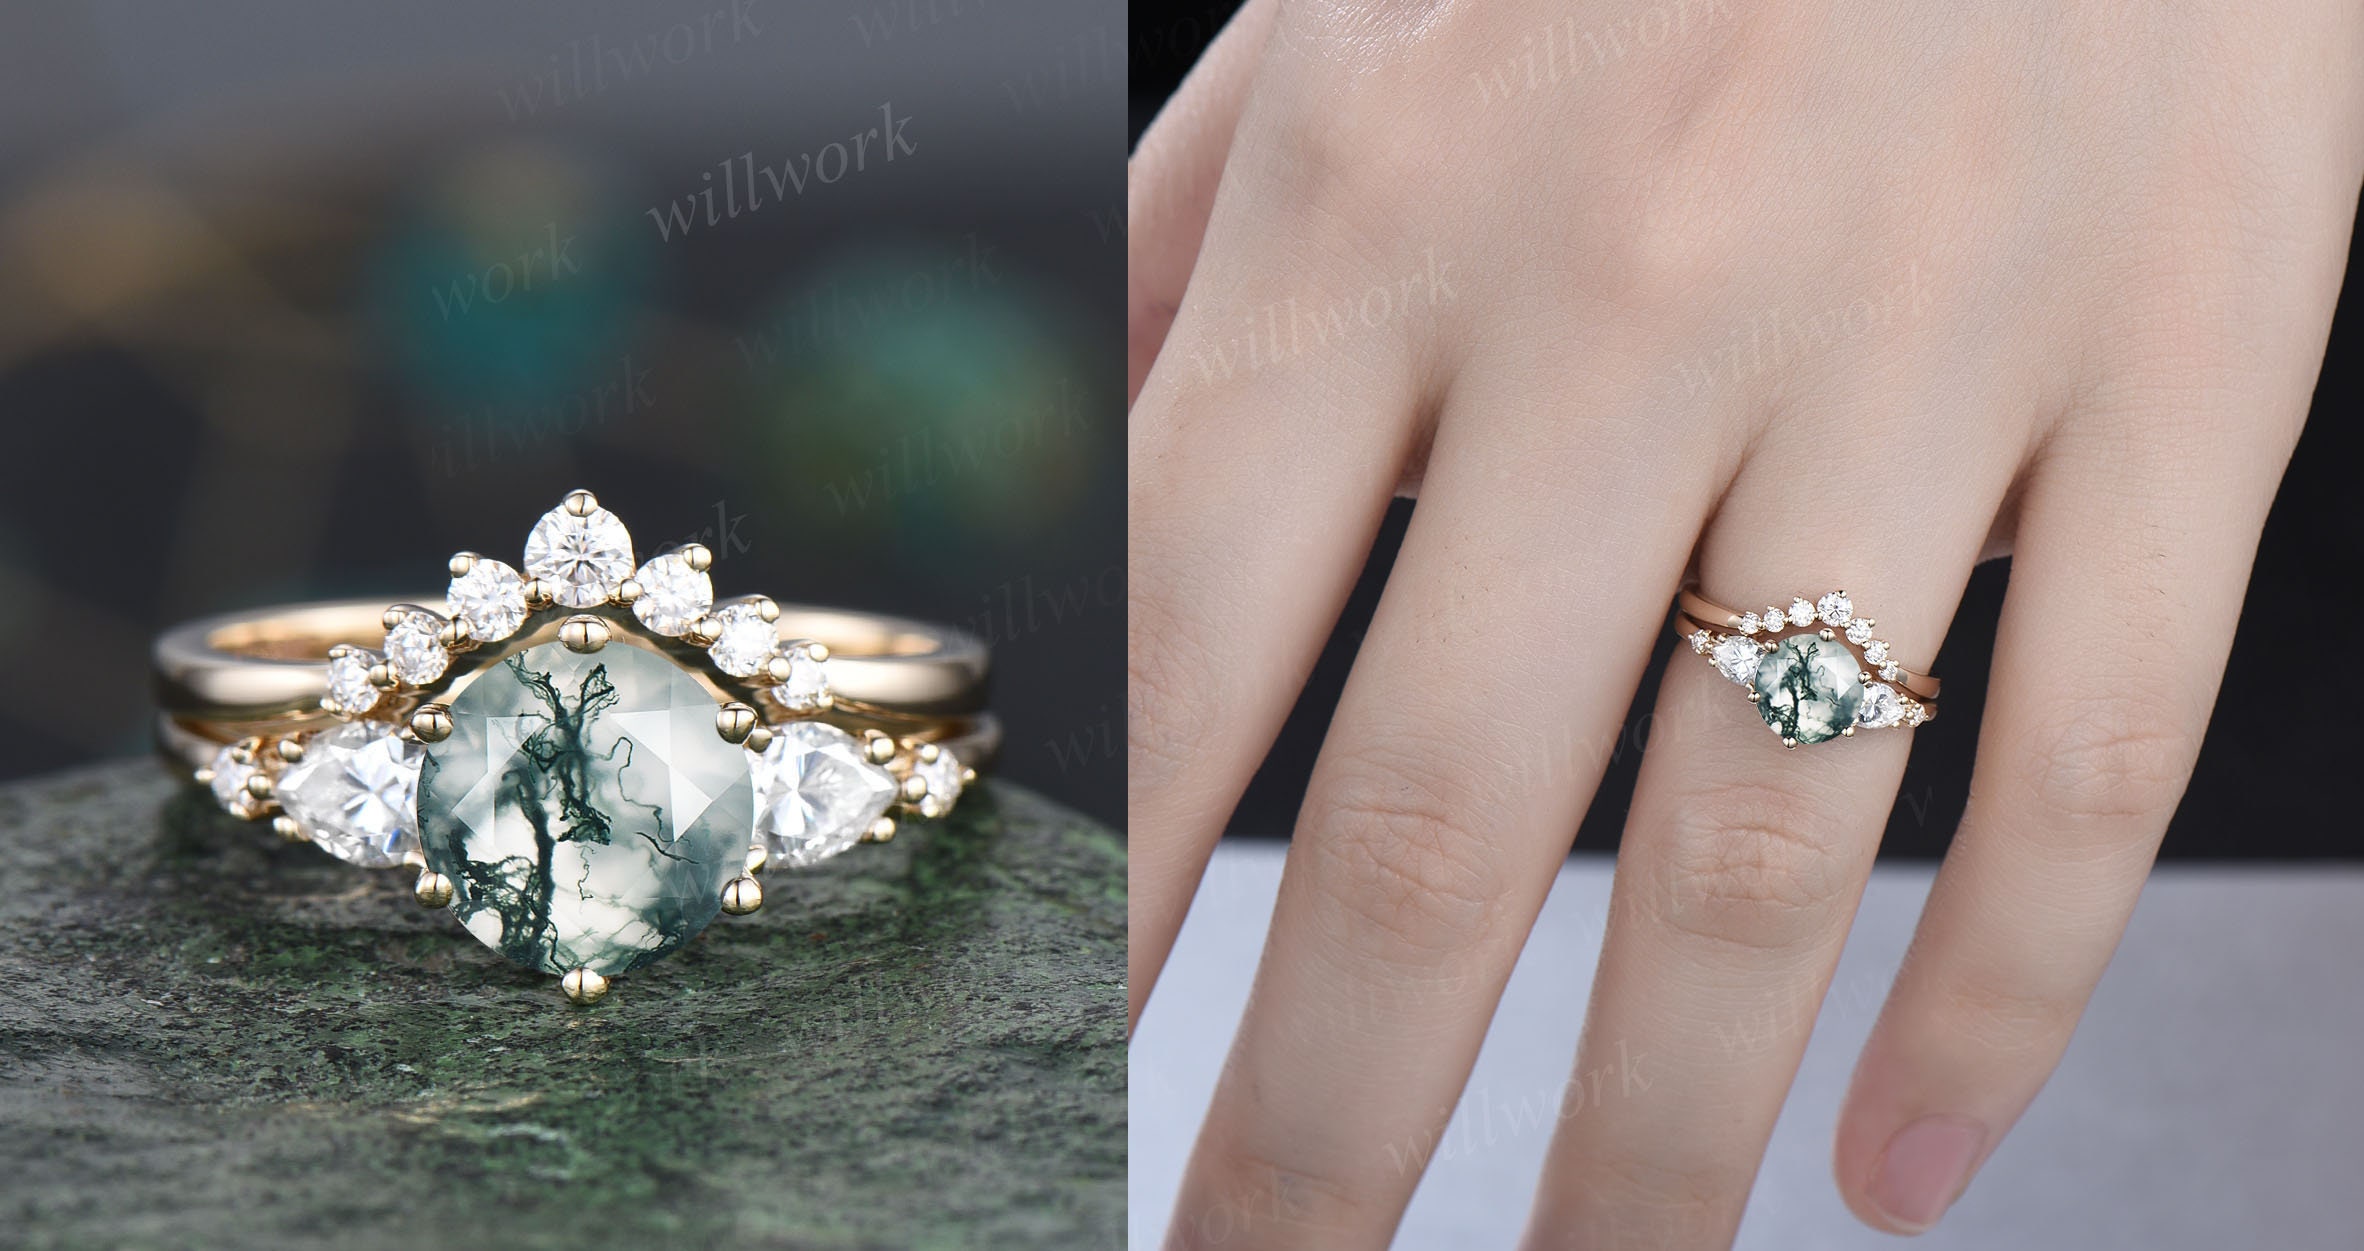 14K solid two tone gold moss agate ring 5mm dainty aquatic agate engagement  ring Twisted wedding ring women Unique crystal bridal ring gift